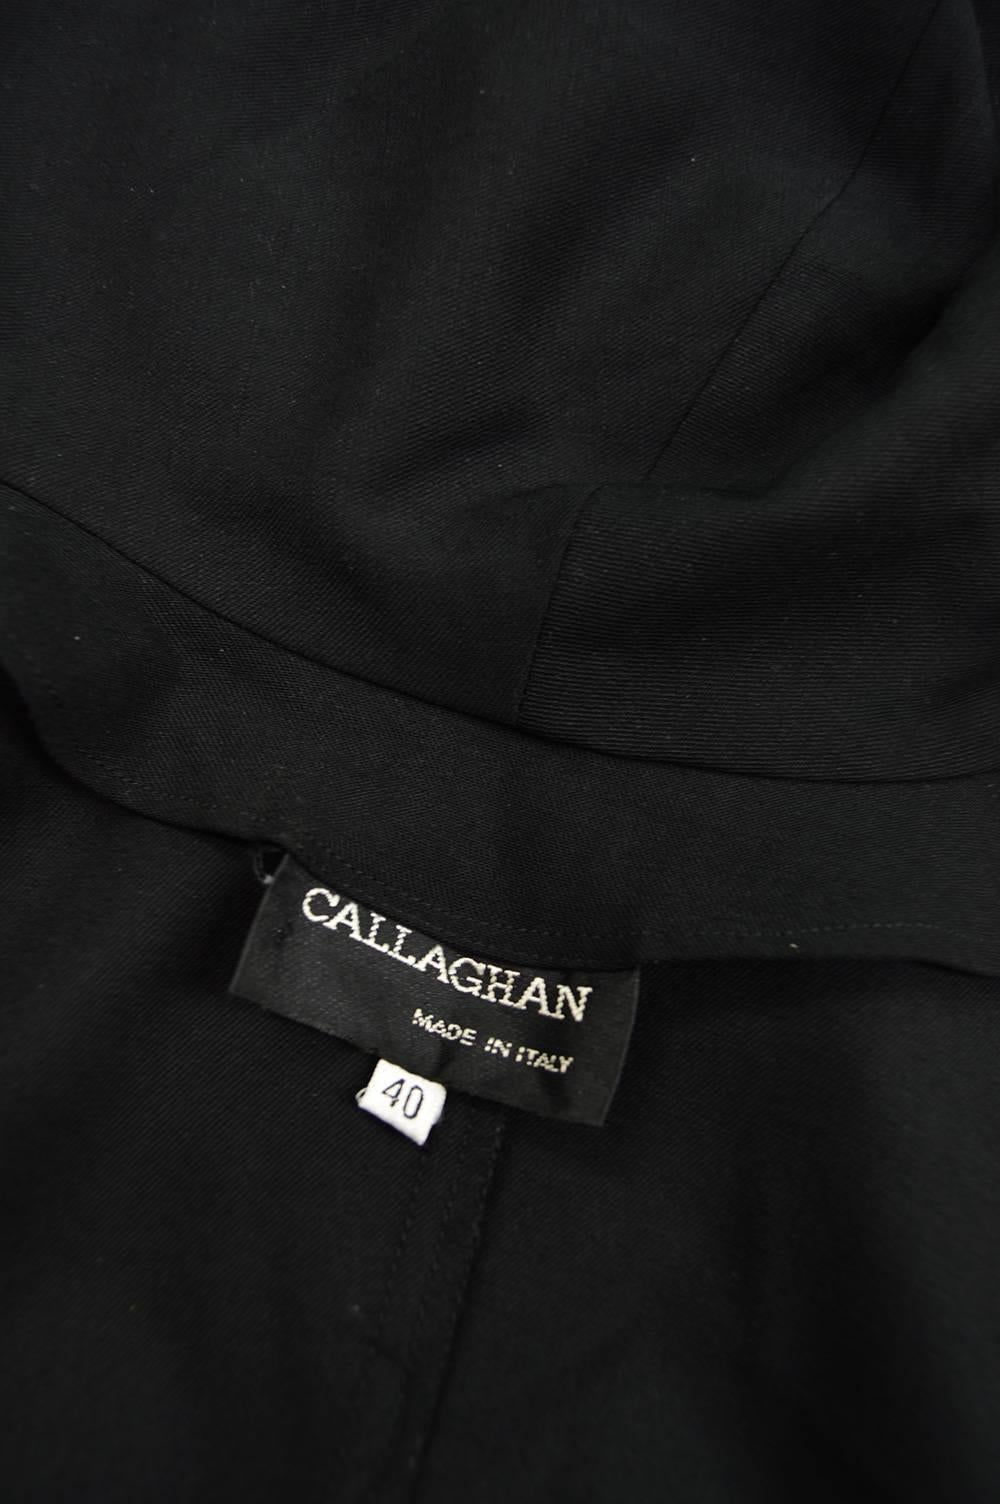 Romeo Gigli for Callaghan Knotted Fringed Black Stretch Wool Jacket, 1990s  For Sale 3